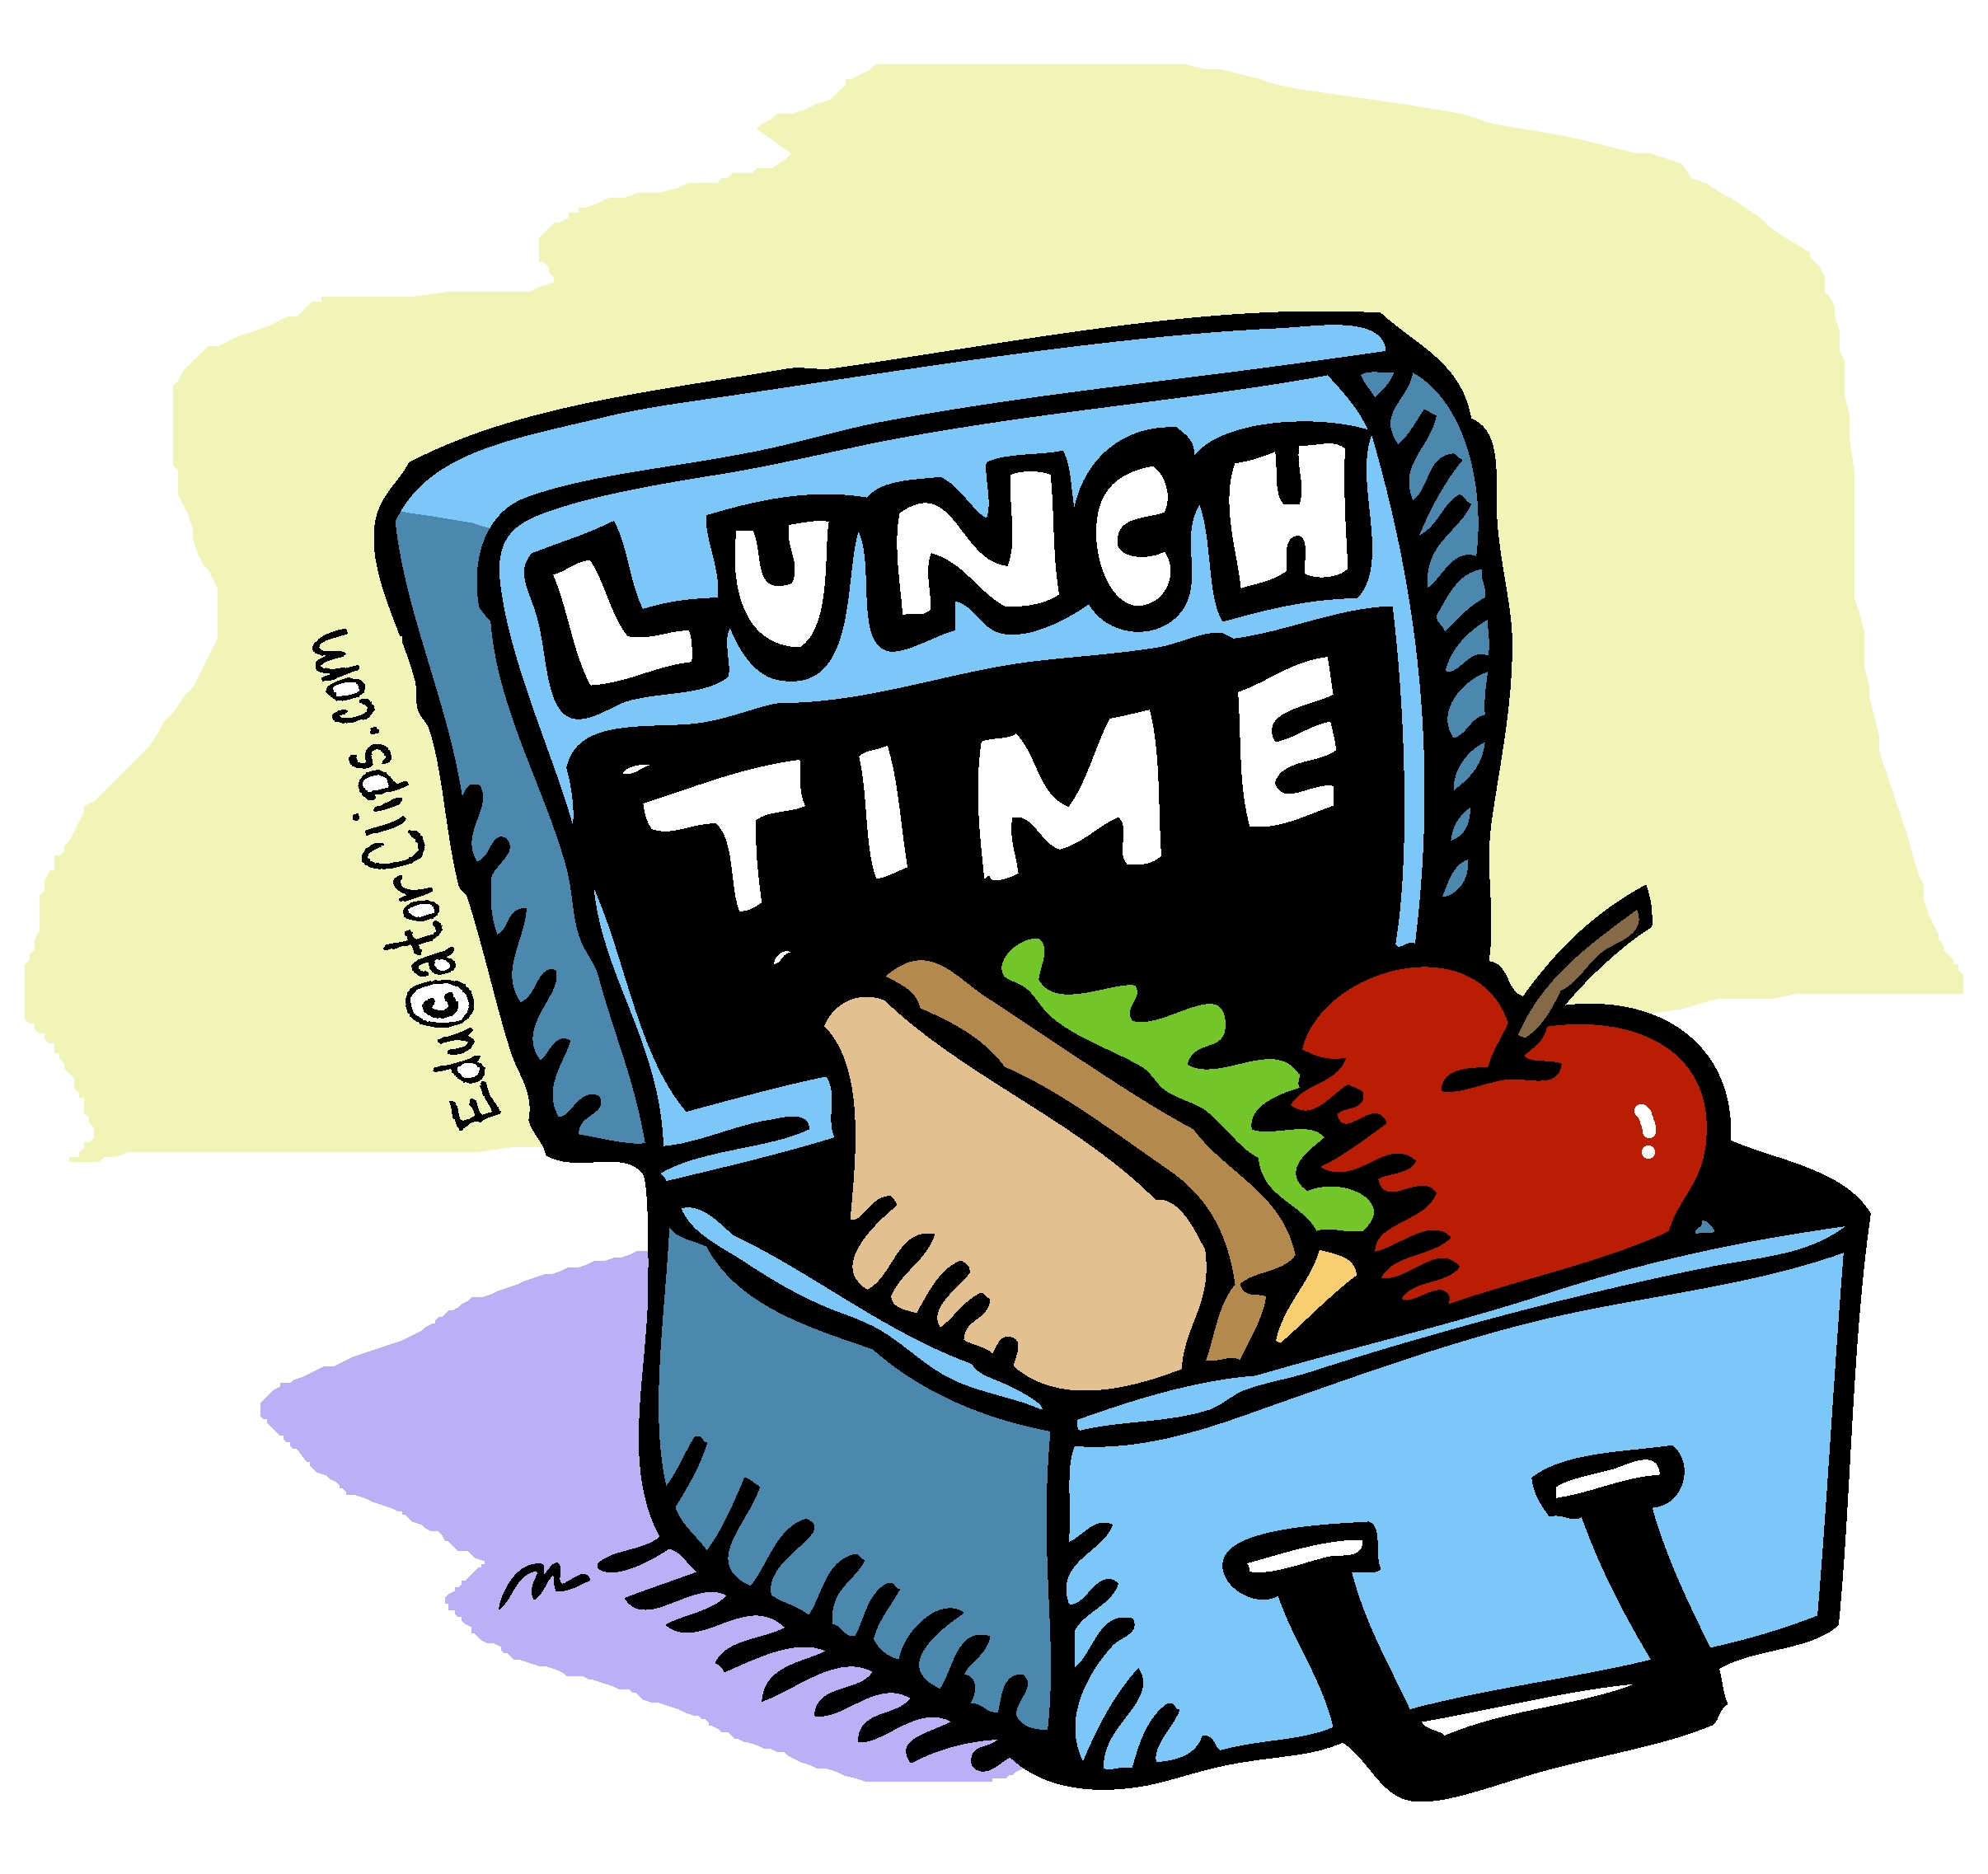 Lunchtime Clip Art, lunchbox clip art,lunch time clip art, lunch clip art